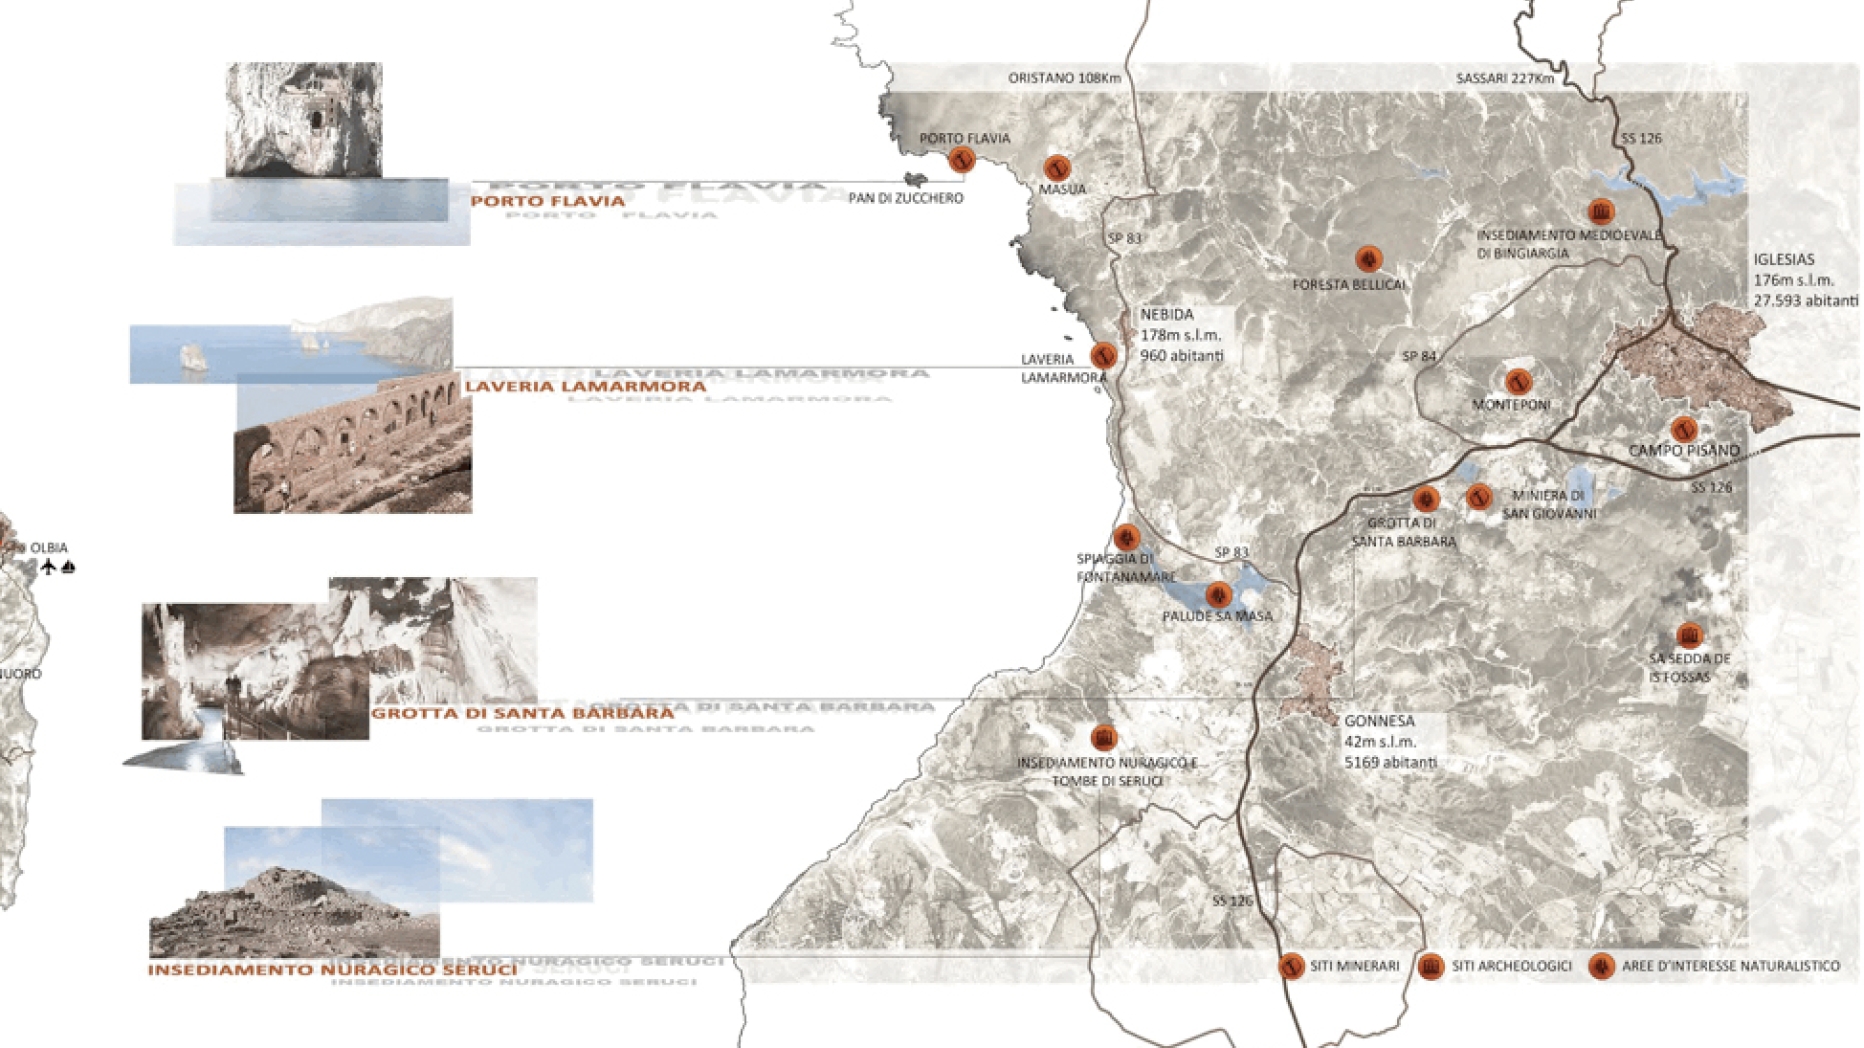 Map of Sardinia Geo-mining park with certain areas highlighted and accompanying photographs.